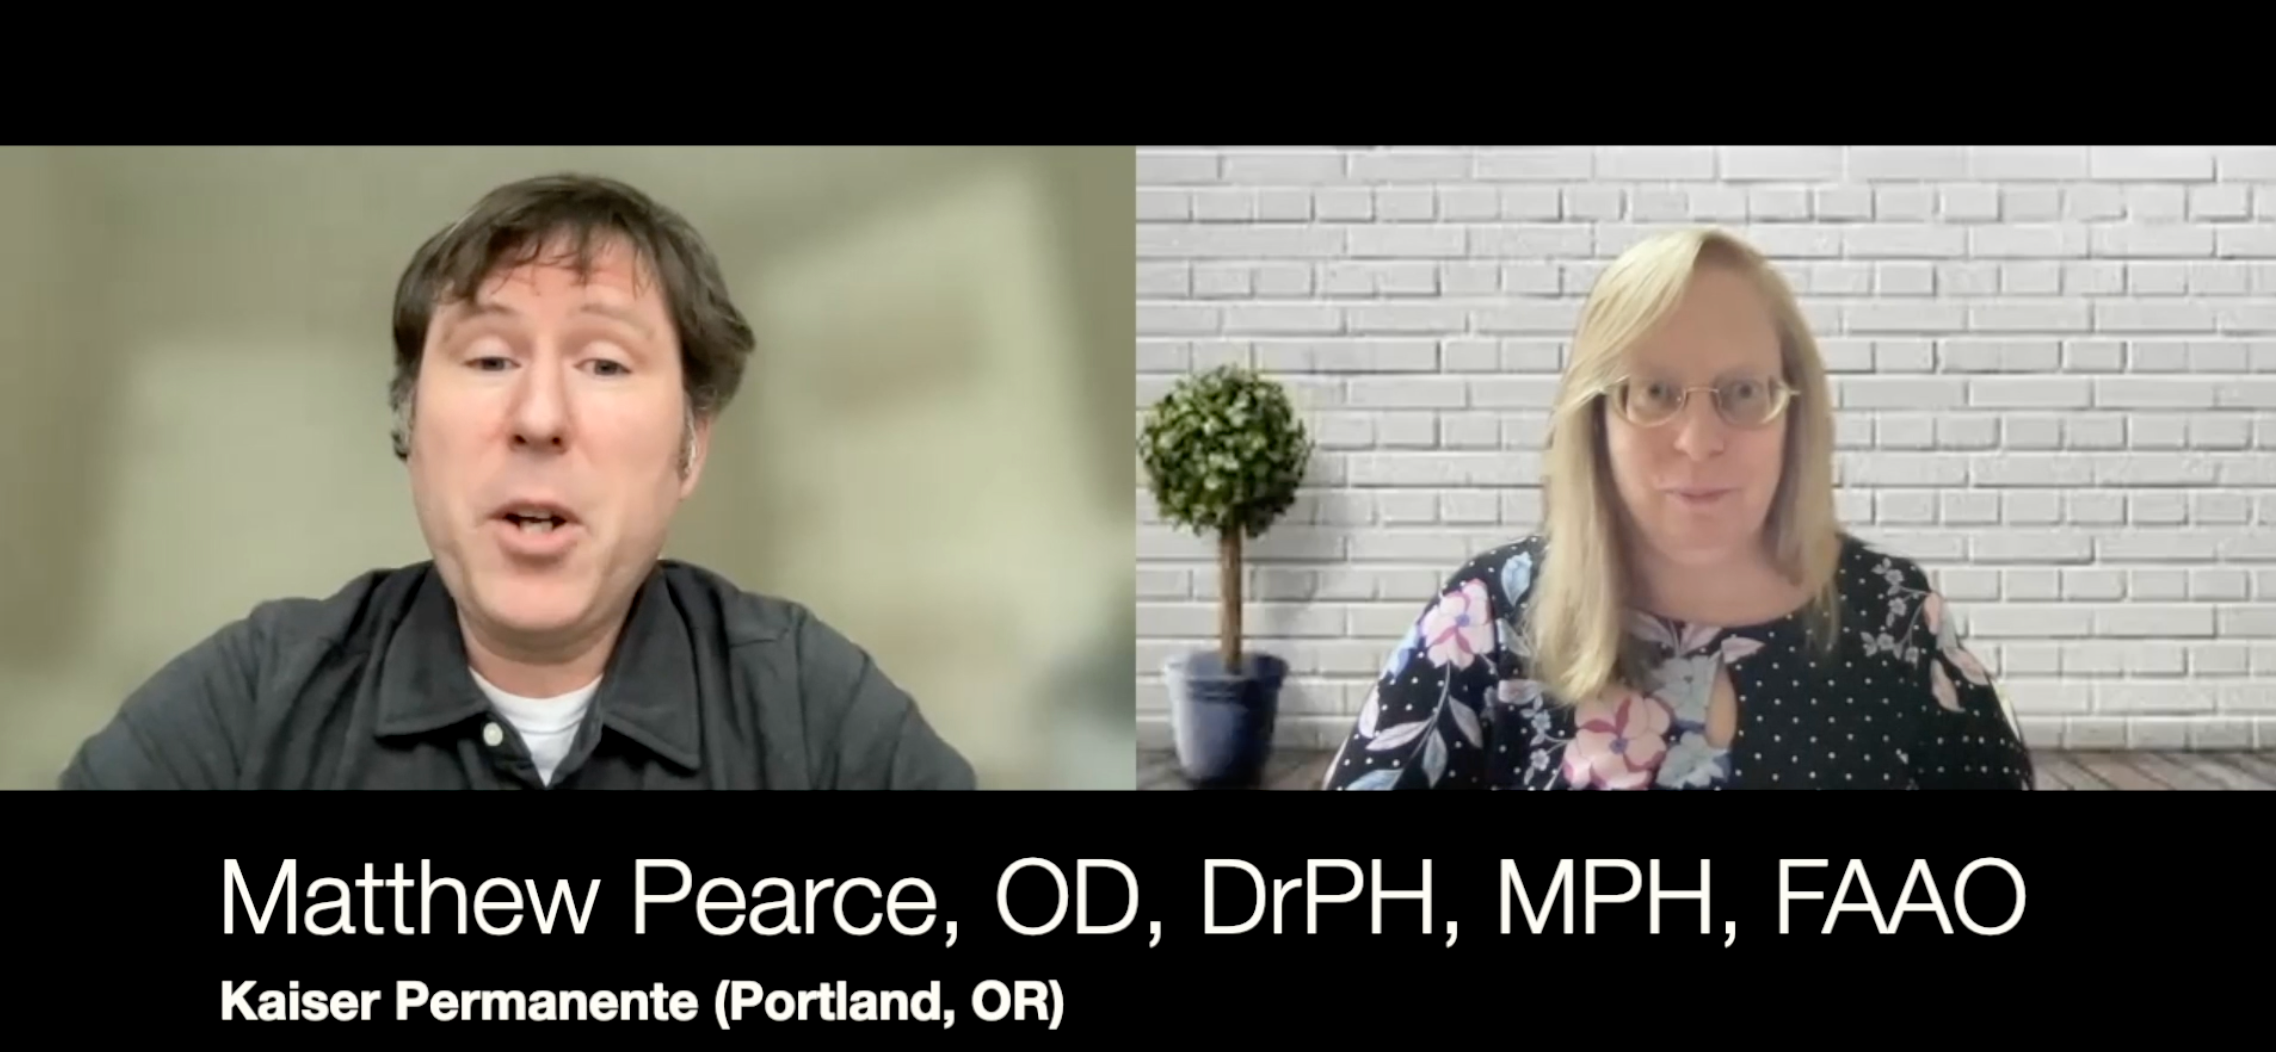 Matthew Pearce, OD, DrPH, MPH, FAAO, shares what he wished he knew about patients before entering the optometic field.